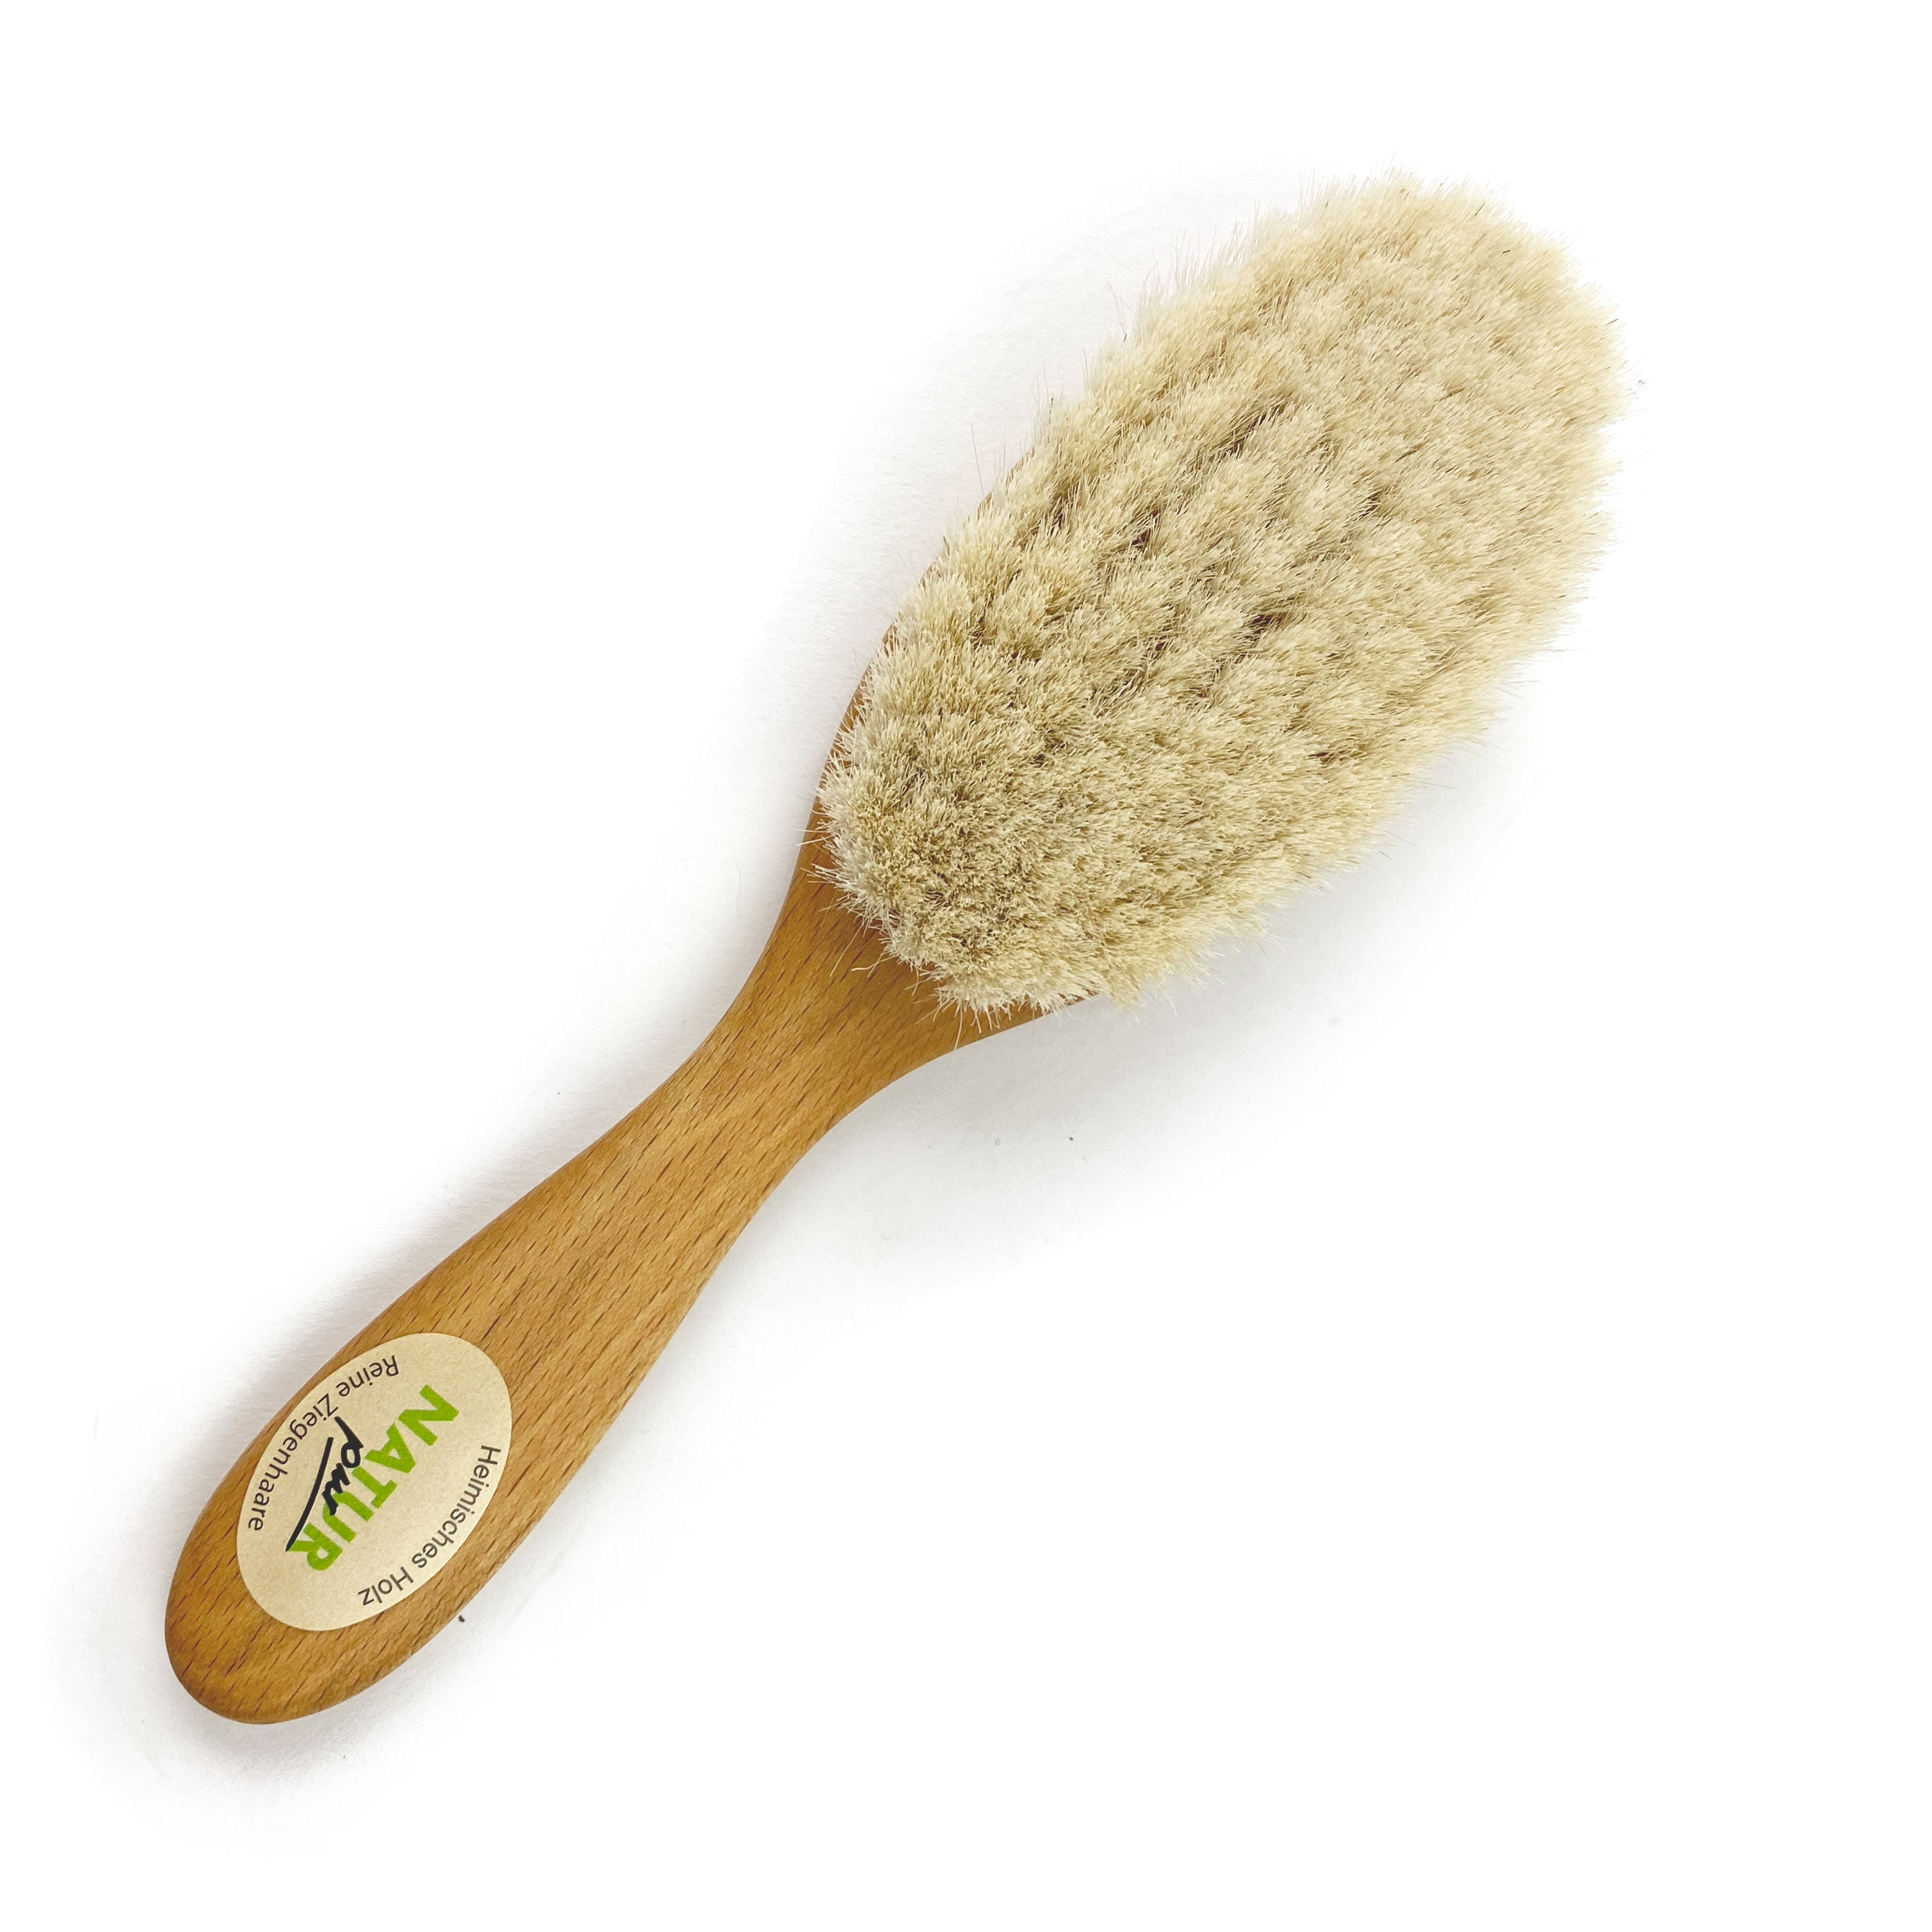 Natural baby brush made in Germany at Bonjour Baby Baskets